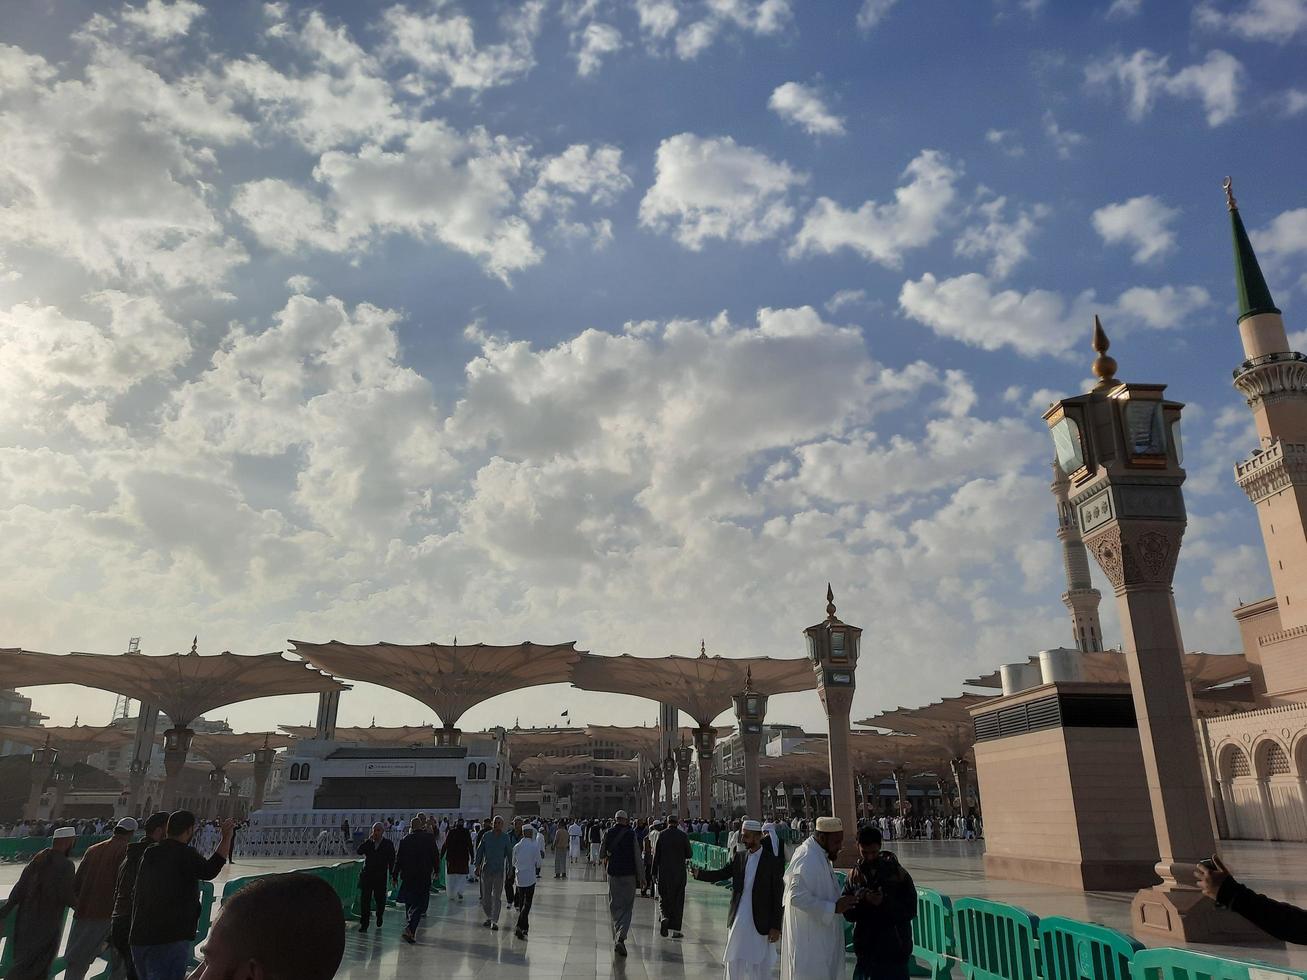 Medina, Saudi Arabia, Dec 2022 - During the day pilgrims from all over the world gather in the outer courtyard of Masjid Al Nabawi, Madinah, Saudi Arabia. photo